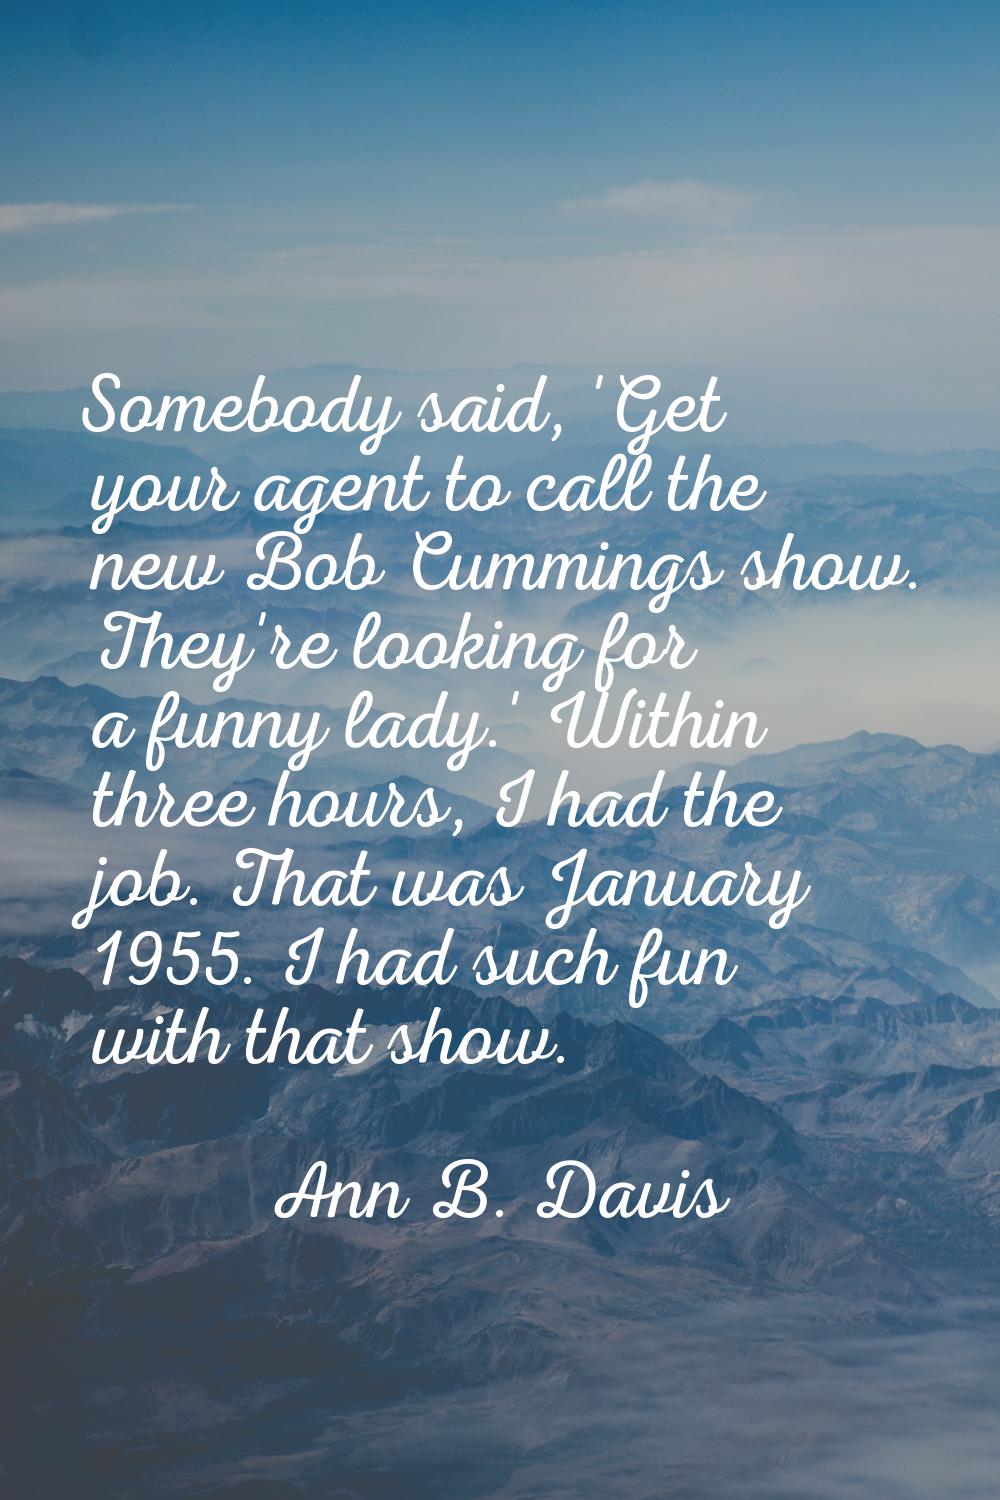 Somebody said, 'Get your agent to call the new Bob Cummings show. They're looking for a funny lady.